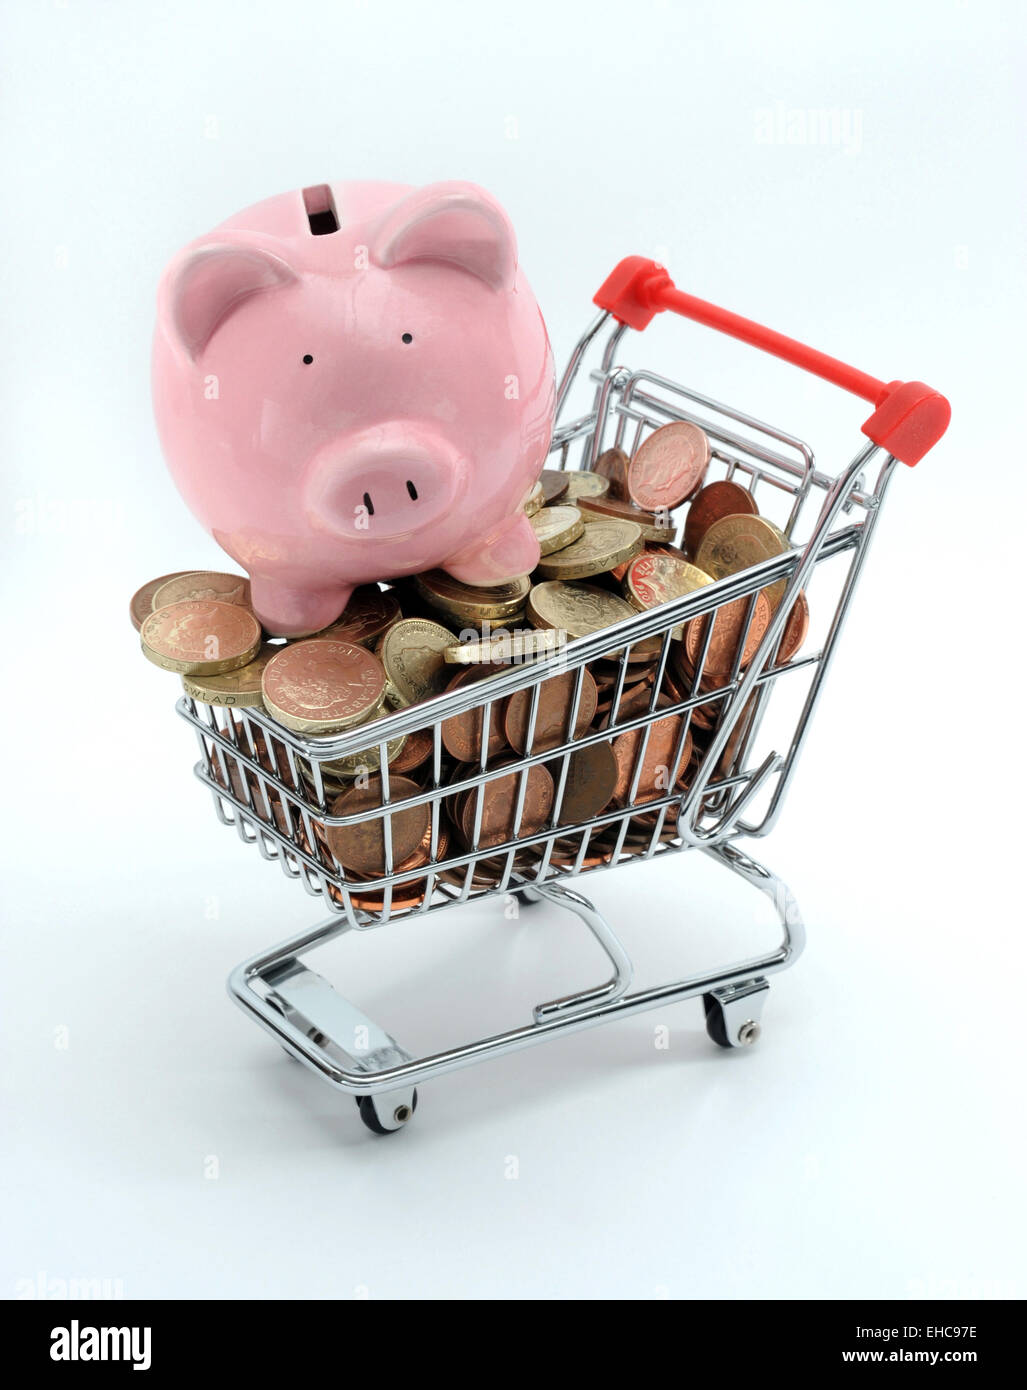 PIGGYBANK ON SUPERMARKET SHOPPING TROLLEY RE PENSIONS INCOMES FOOD PRICES SAVINGS INVESTMENTS ANNUITY PENSION POT MONEY POUND UK Stock Photo